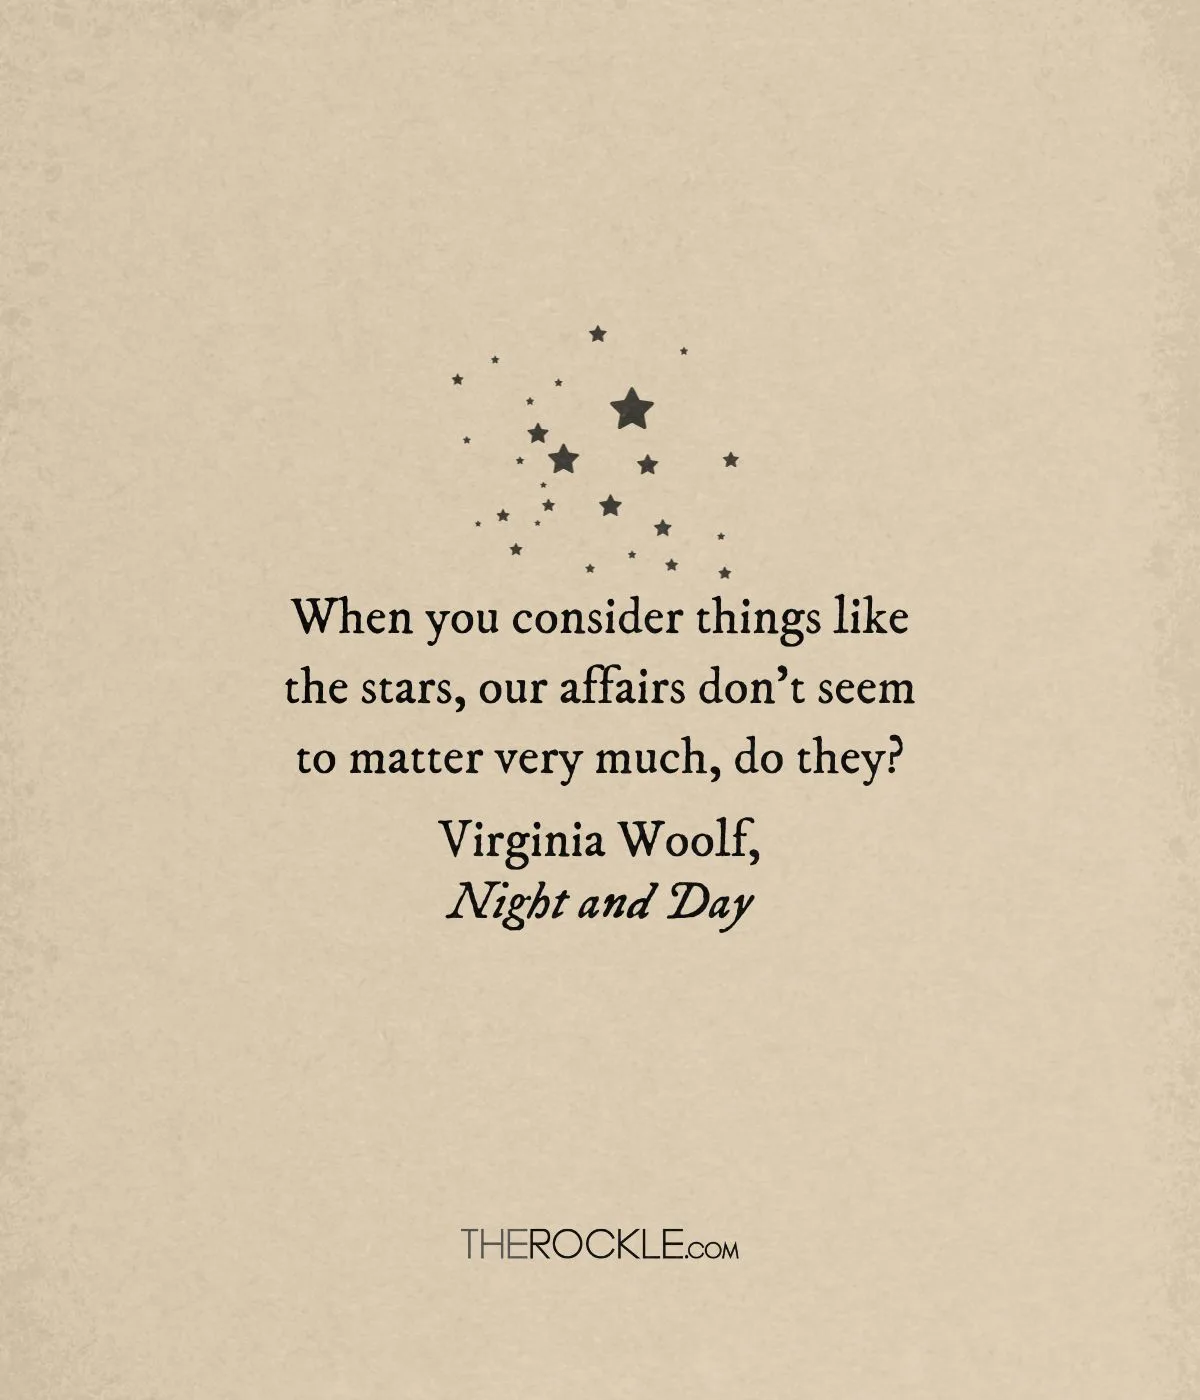 Virginia Woolf on THE insignificance of human affairs